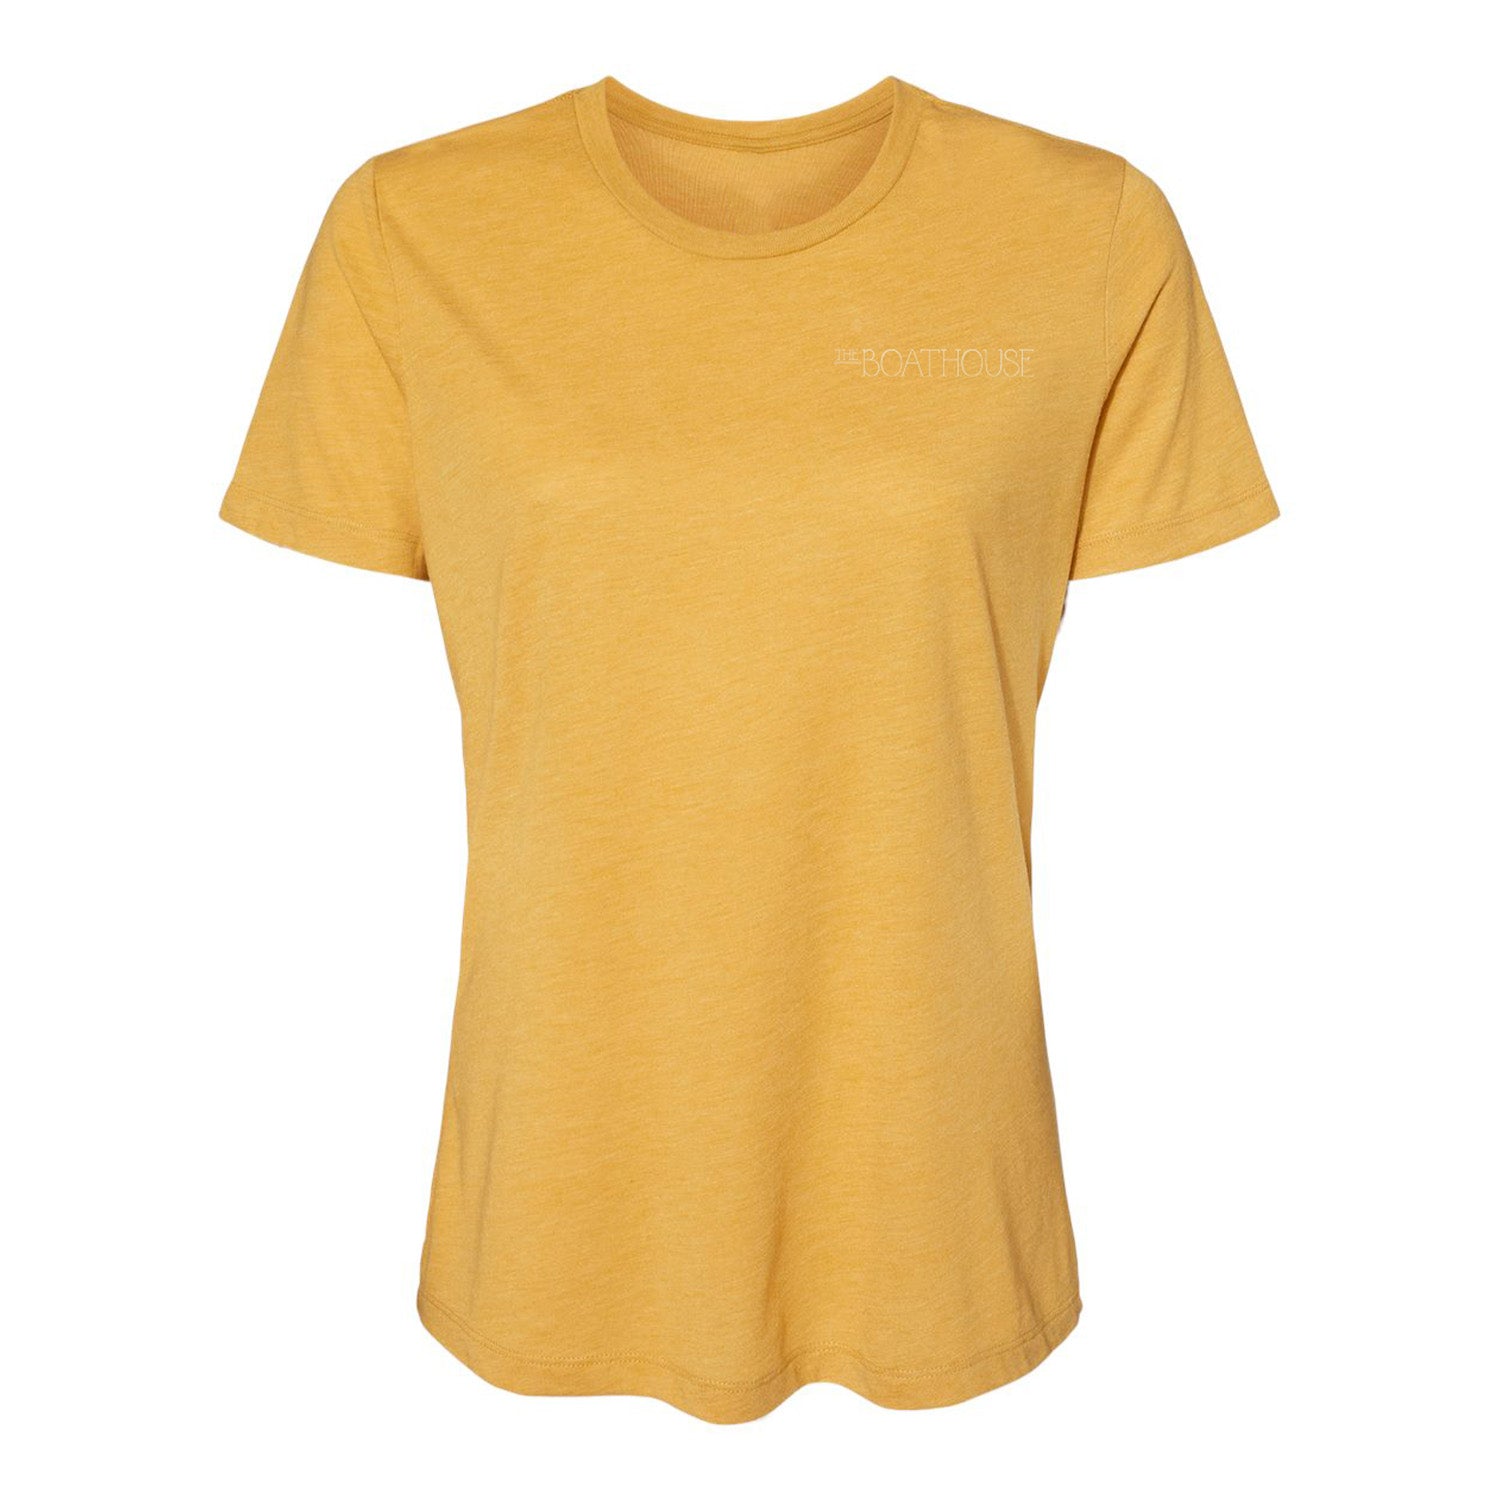 Central Park Boathouse Ladies Yellow T-Shirt - Front View